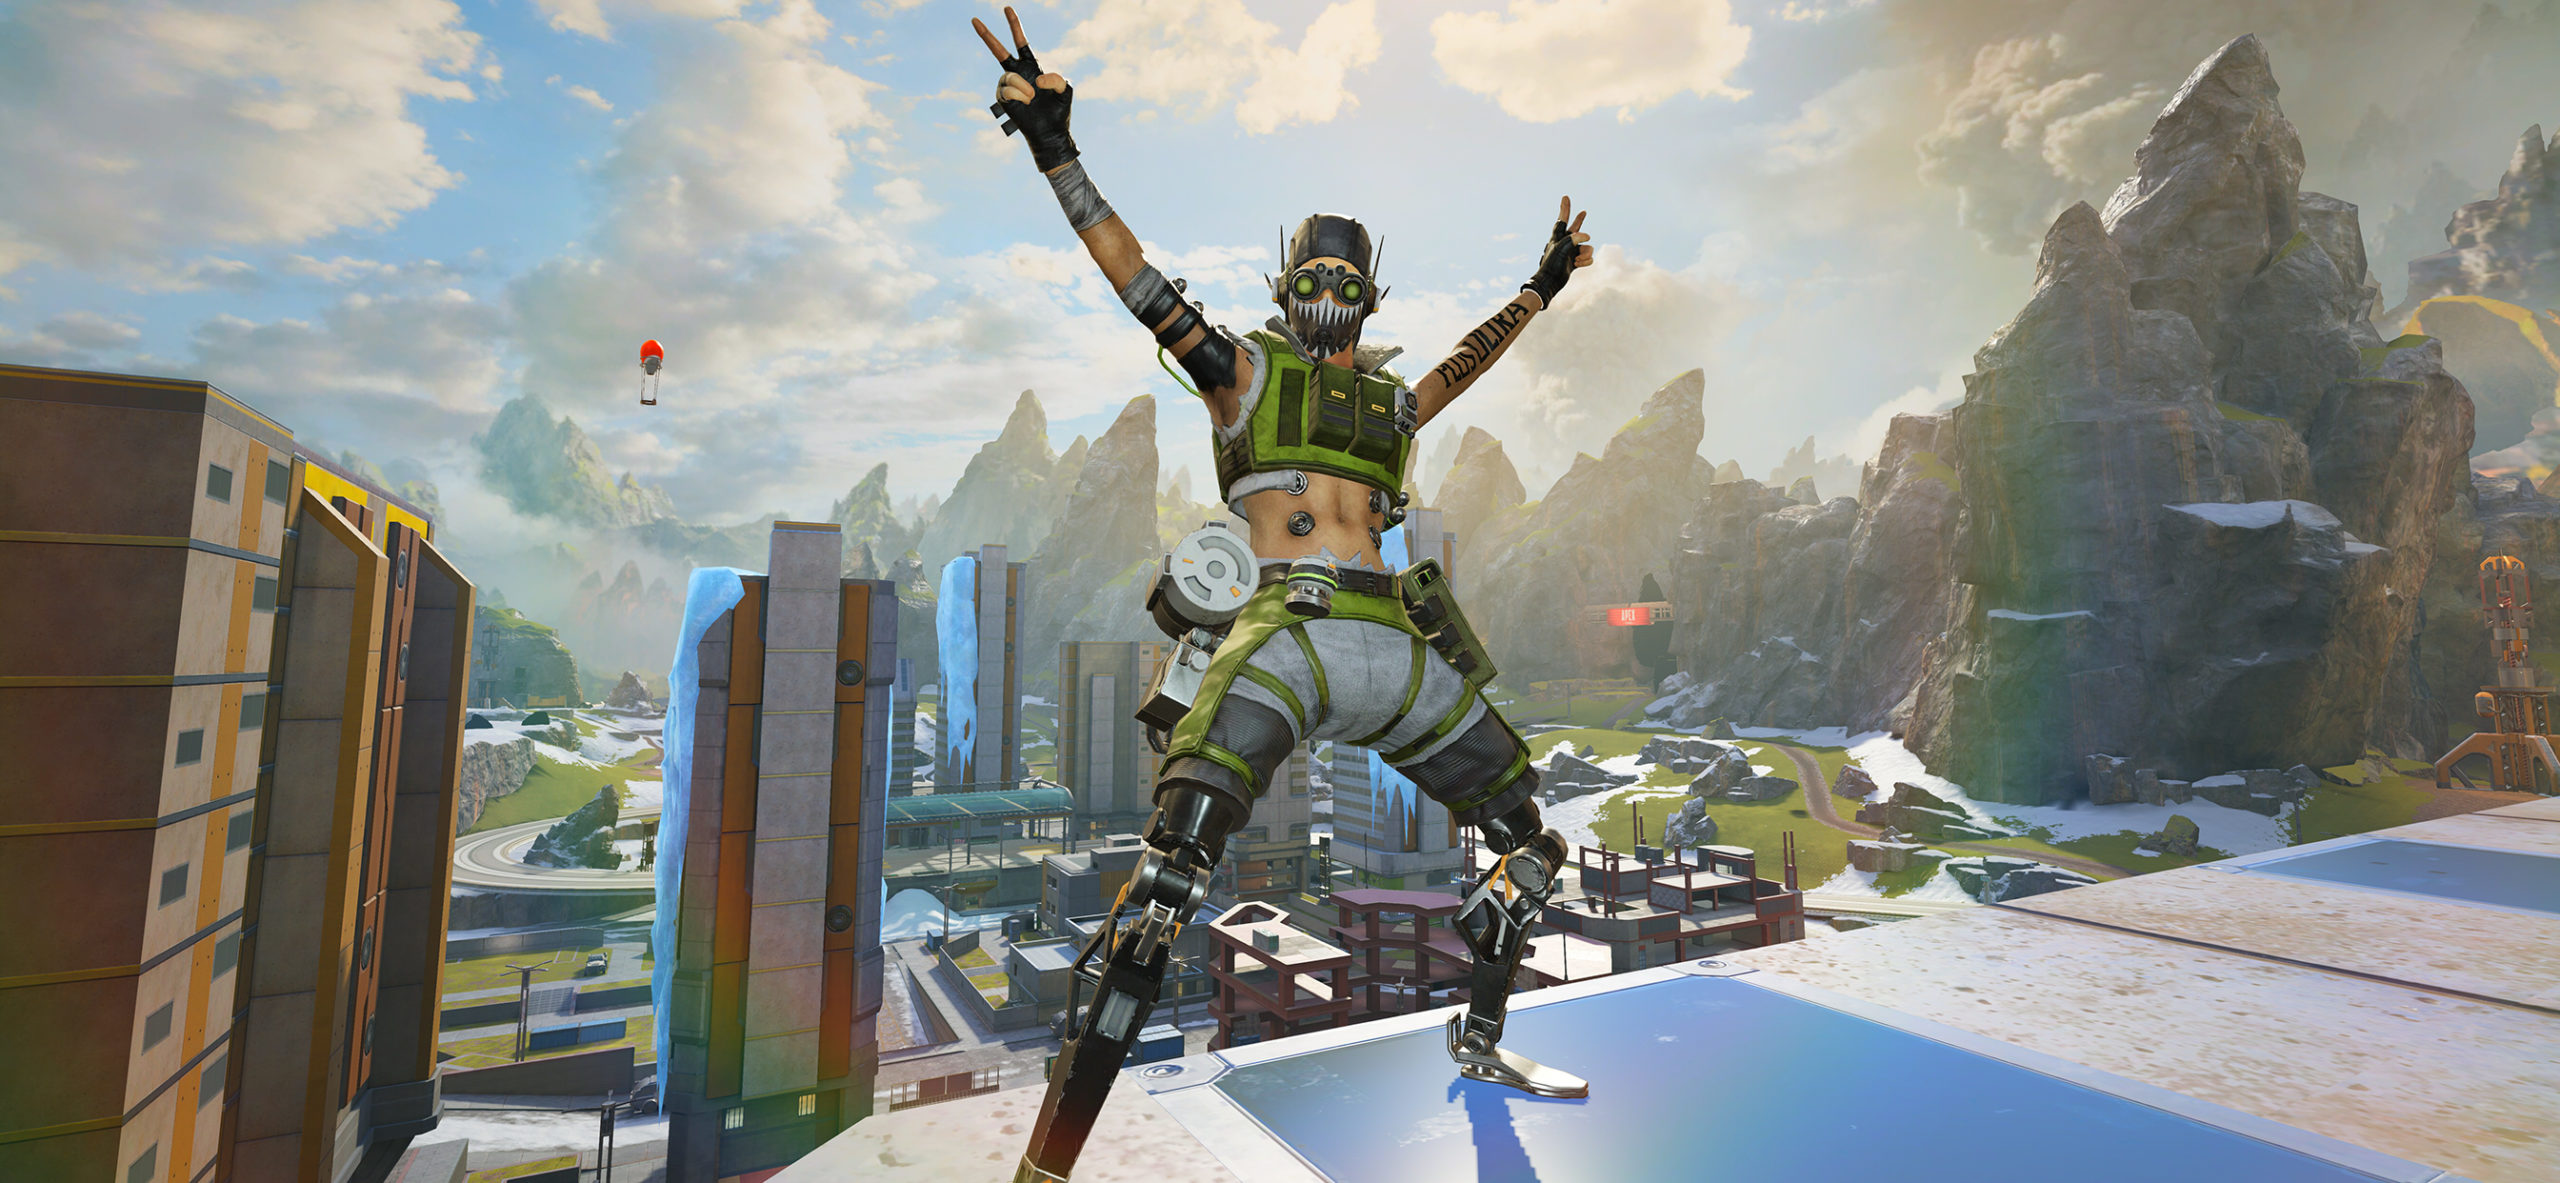 Octane poses in front of Fragment on World's Edge.